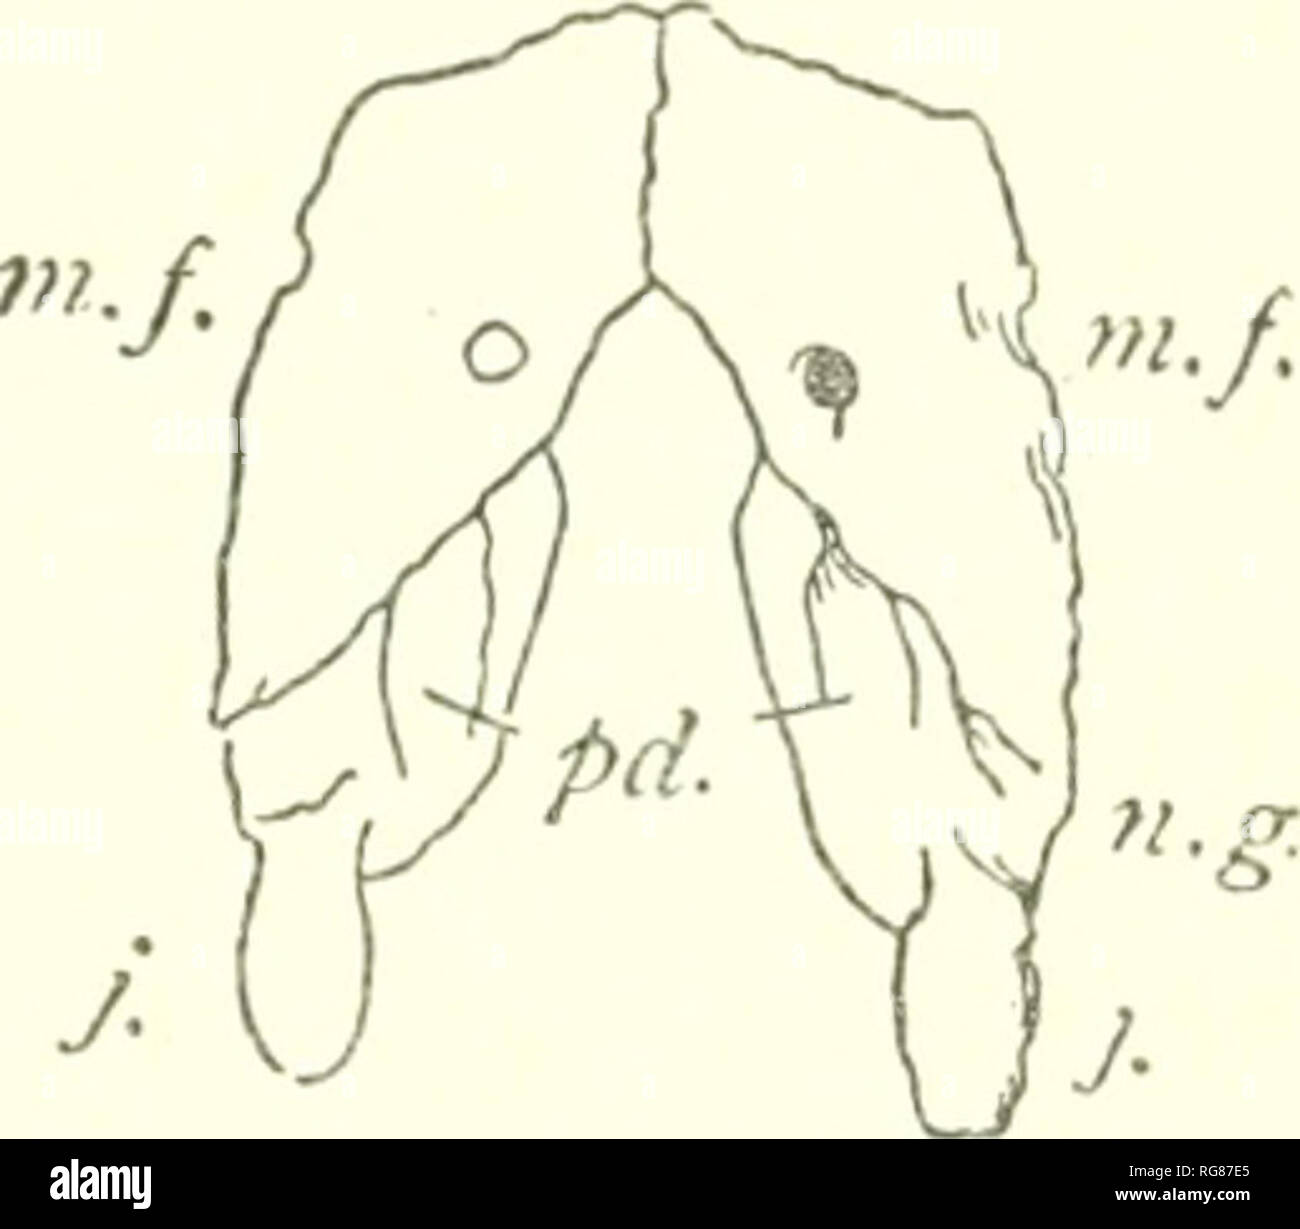 . Bulletin - United States National Museum. Science. Fig. 33.—OpinoTEEE.?is. After Bell from Gregory. Aboral surface of an arm ossicle: a, articular CA^^TIEs; d, the double dorsal shields; /, lateral arm plates. Fig. 34.—Syngnaths of Ophiura cillris. After MOller from Gregory, j, jaw; TO./., mouthframe; n. g., groove for cir- CUMCESOPUAGEAL nerve-ring; p.(/.,PORE .ND depression FOR ORAL TENTACLE. before the Triassic, since which time they occur more and more com- monly. In the present oceanic waters they are popularly known as sand-stars, brittle-stars, branching-stars, or basket stai&quot;i Stock Photo